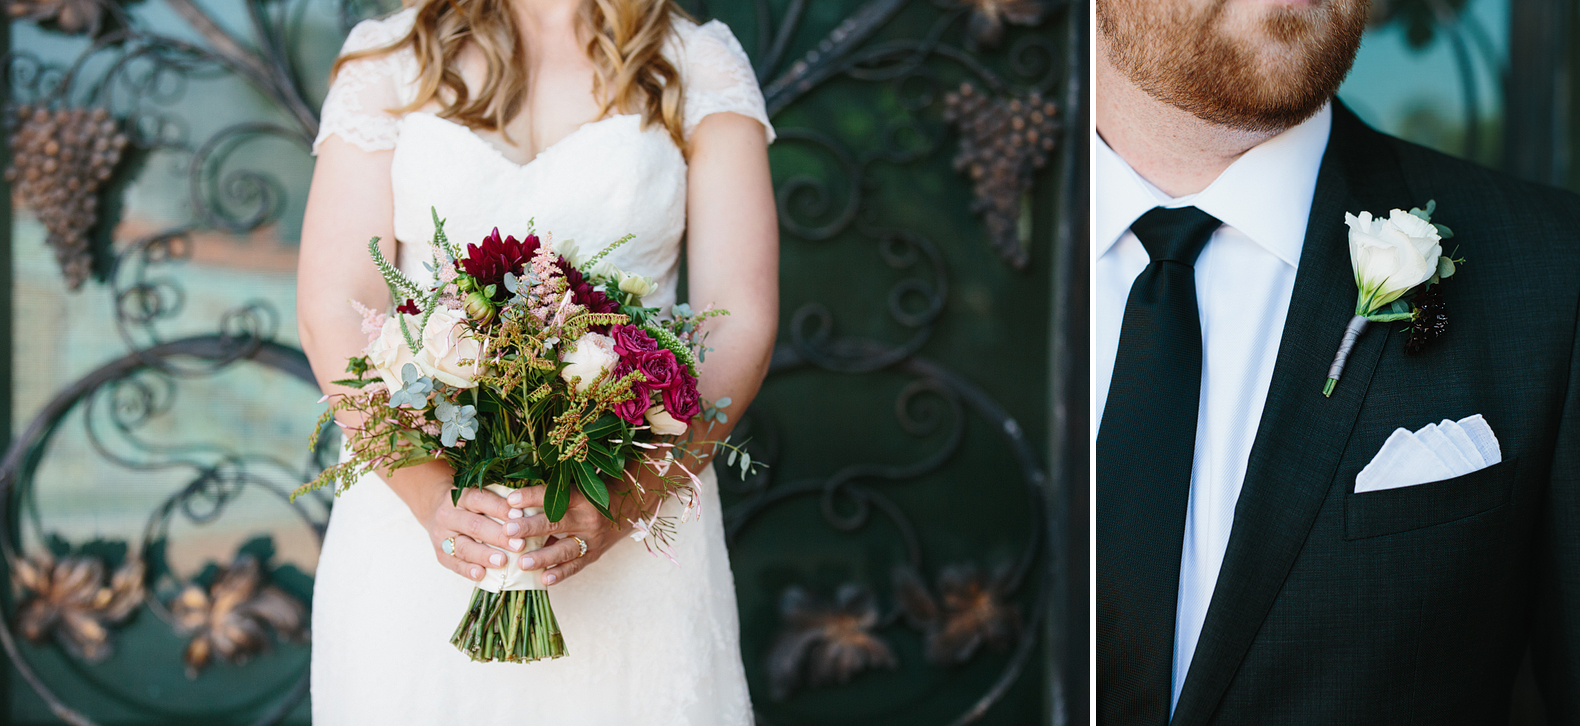 These are detail photos of Alix and Matt's flowers and tie.